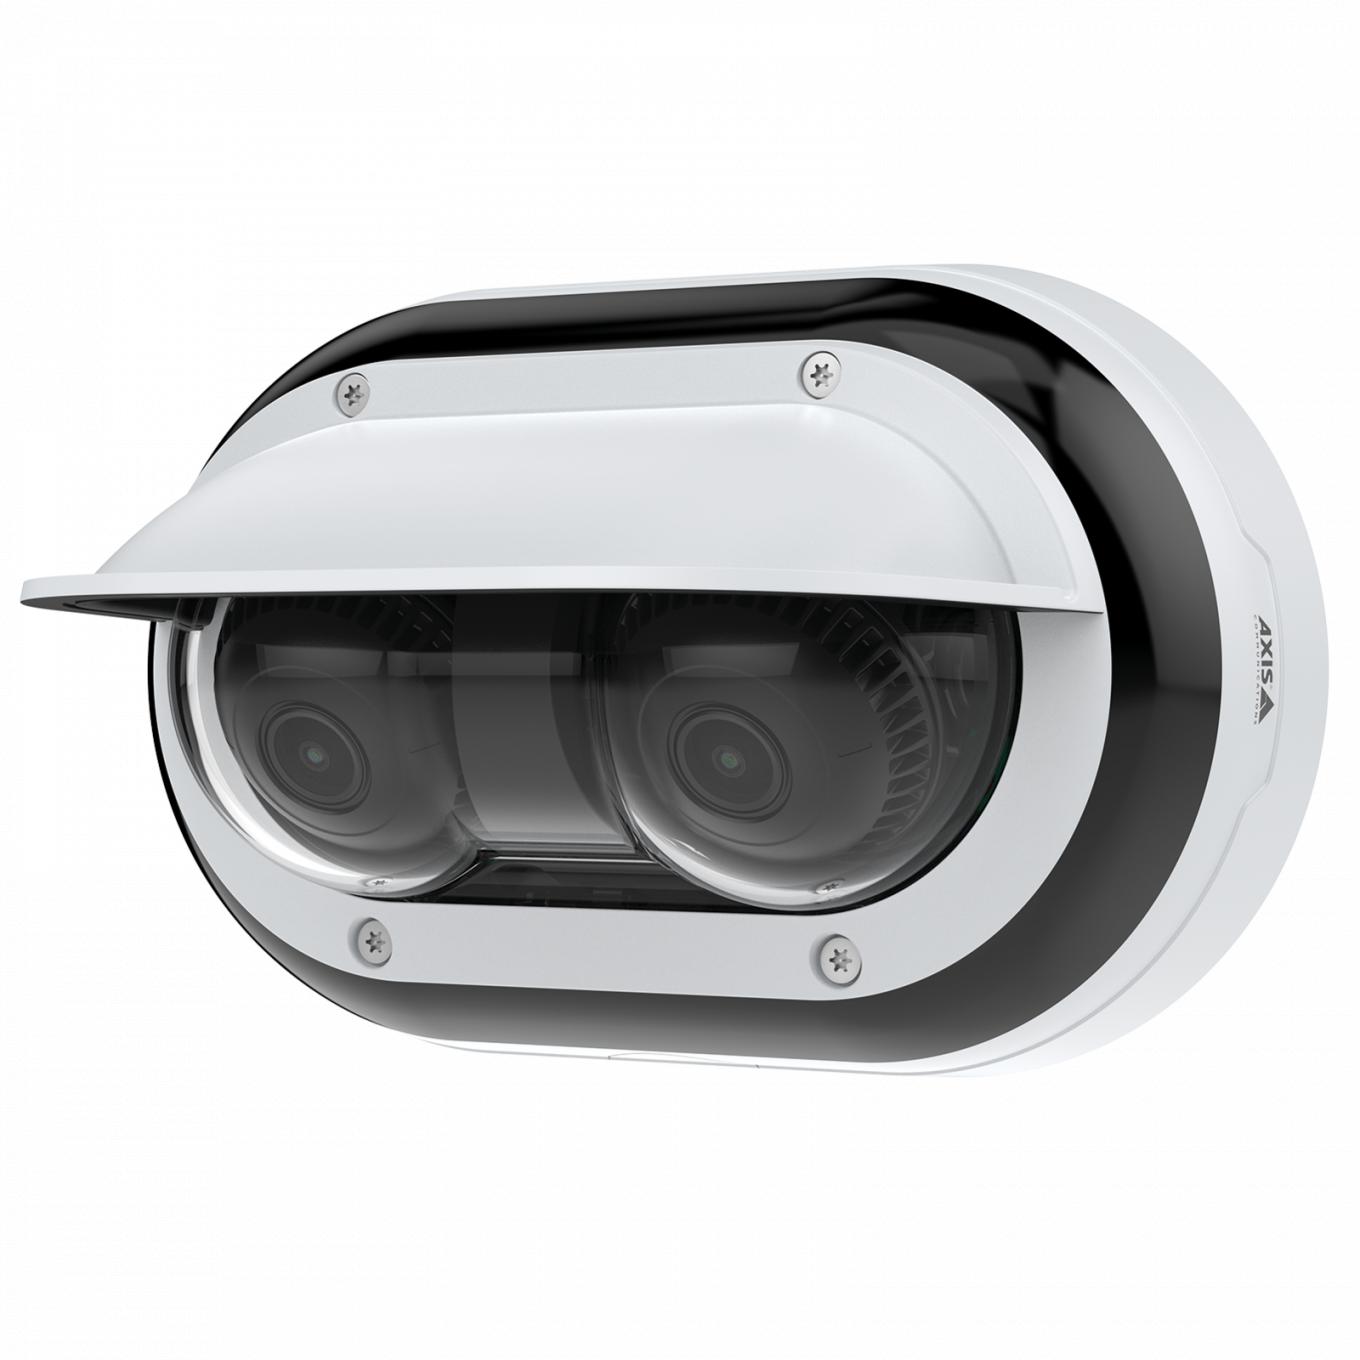 AXIS P4707-PLVE Panoramic Camera | Axis Communications